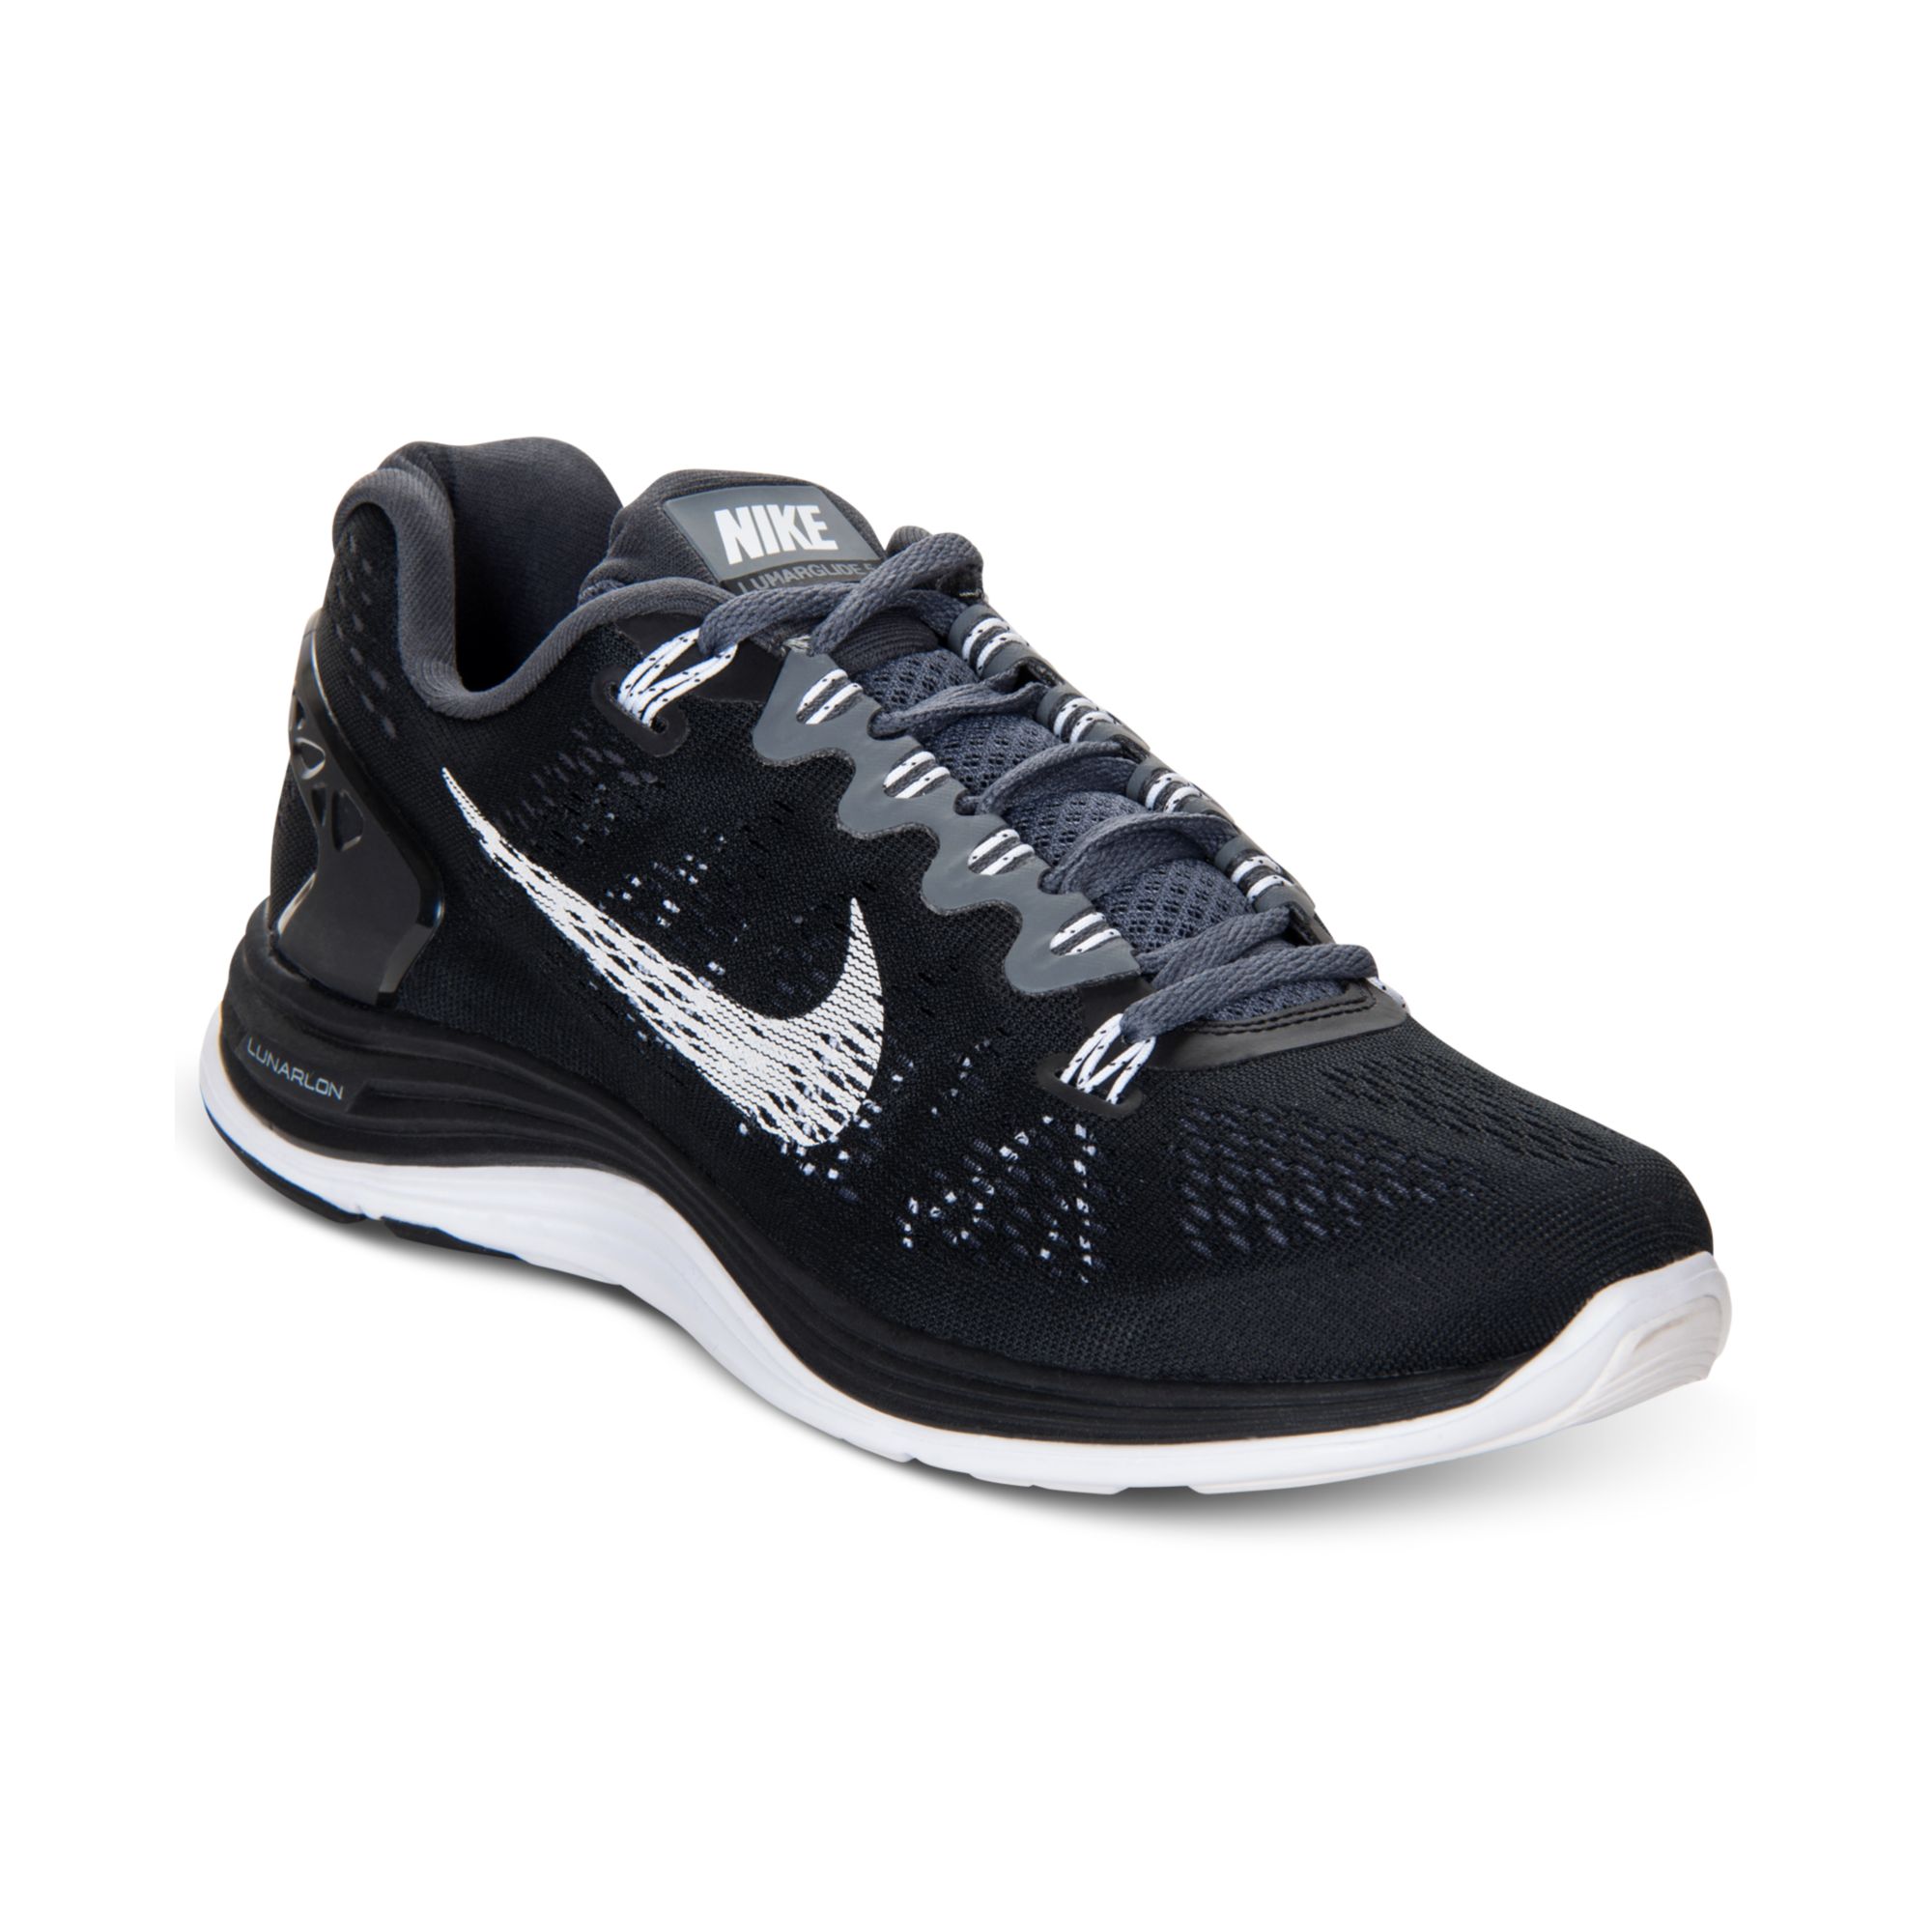 nike lunarglide 5 mens review 